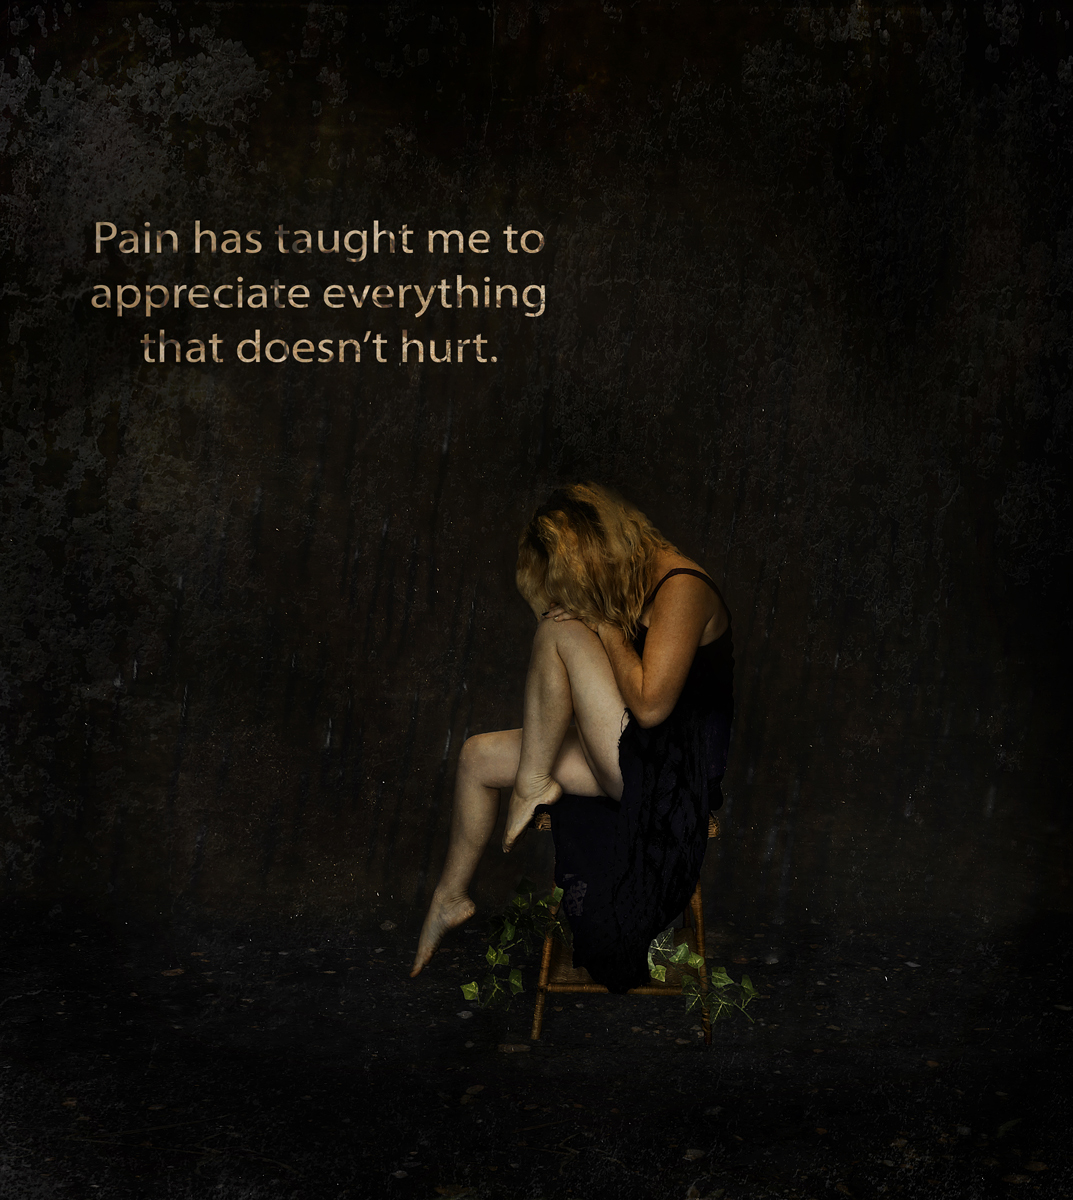 Pain has taught me to appreciate everything that doesnt hurt.